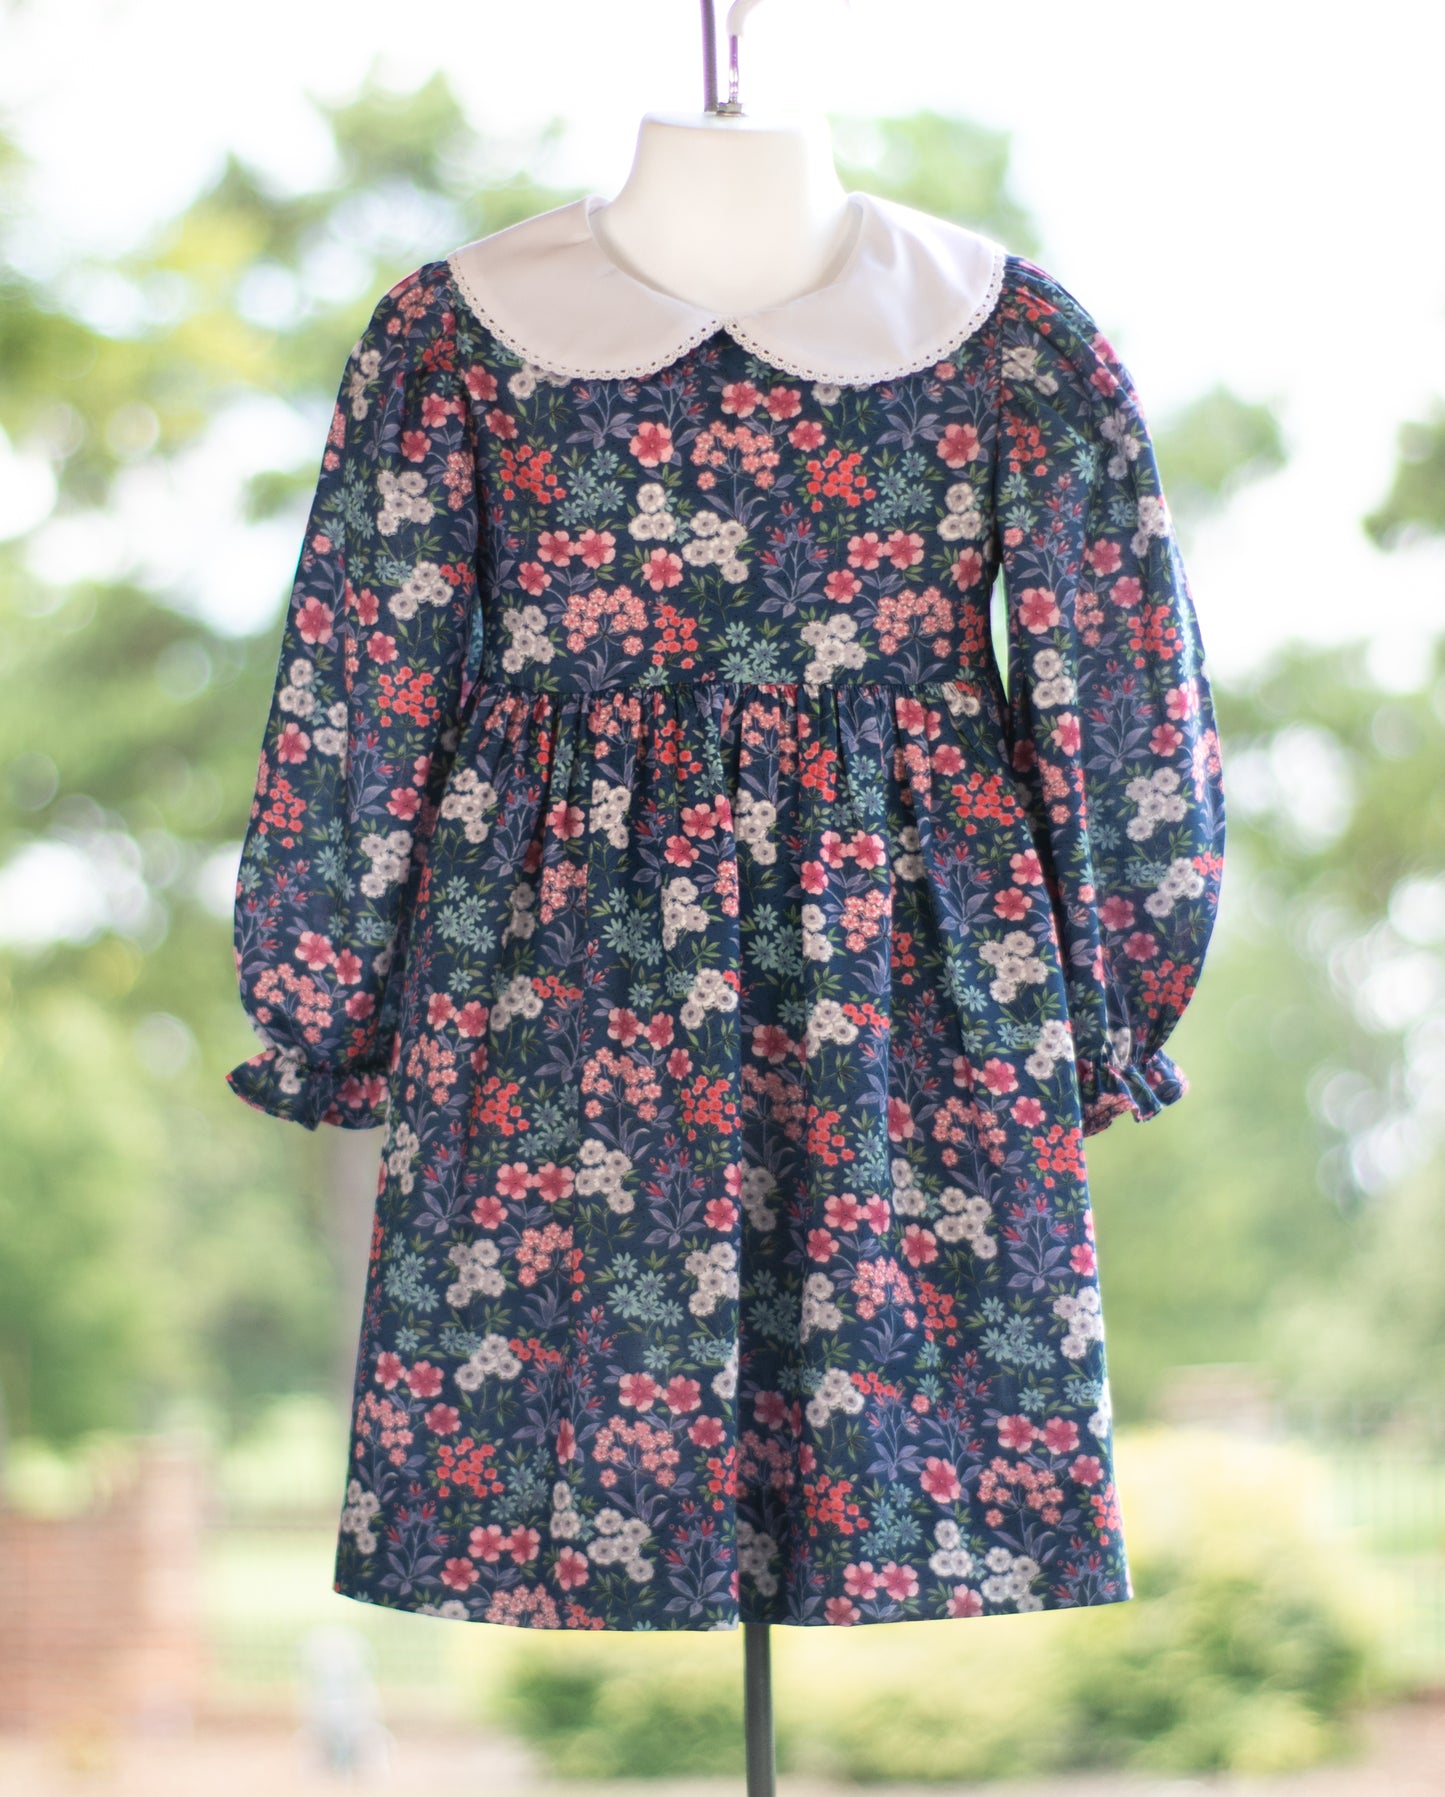 Spanish garden Kate dress w/lace and sash 4T